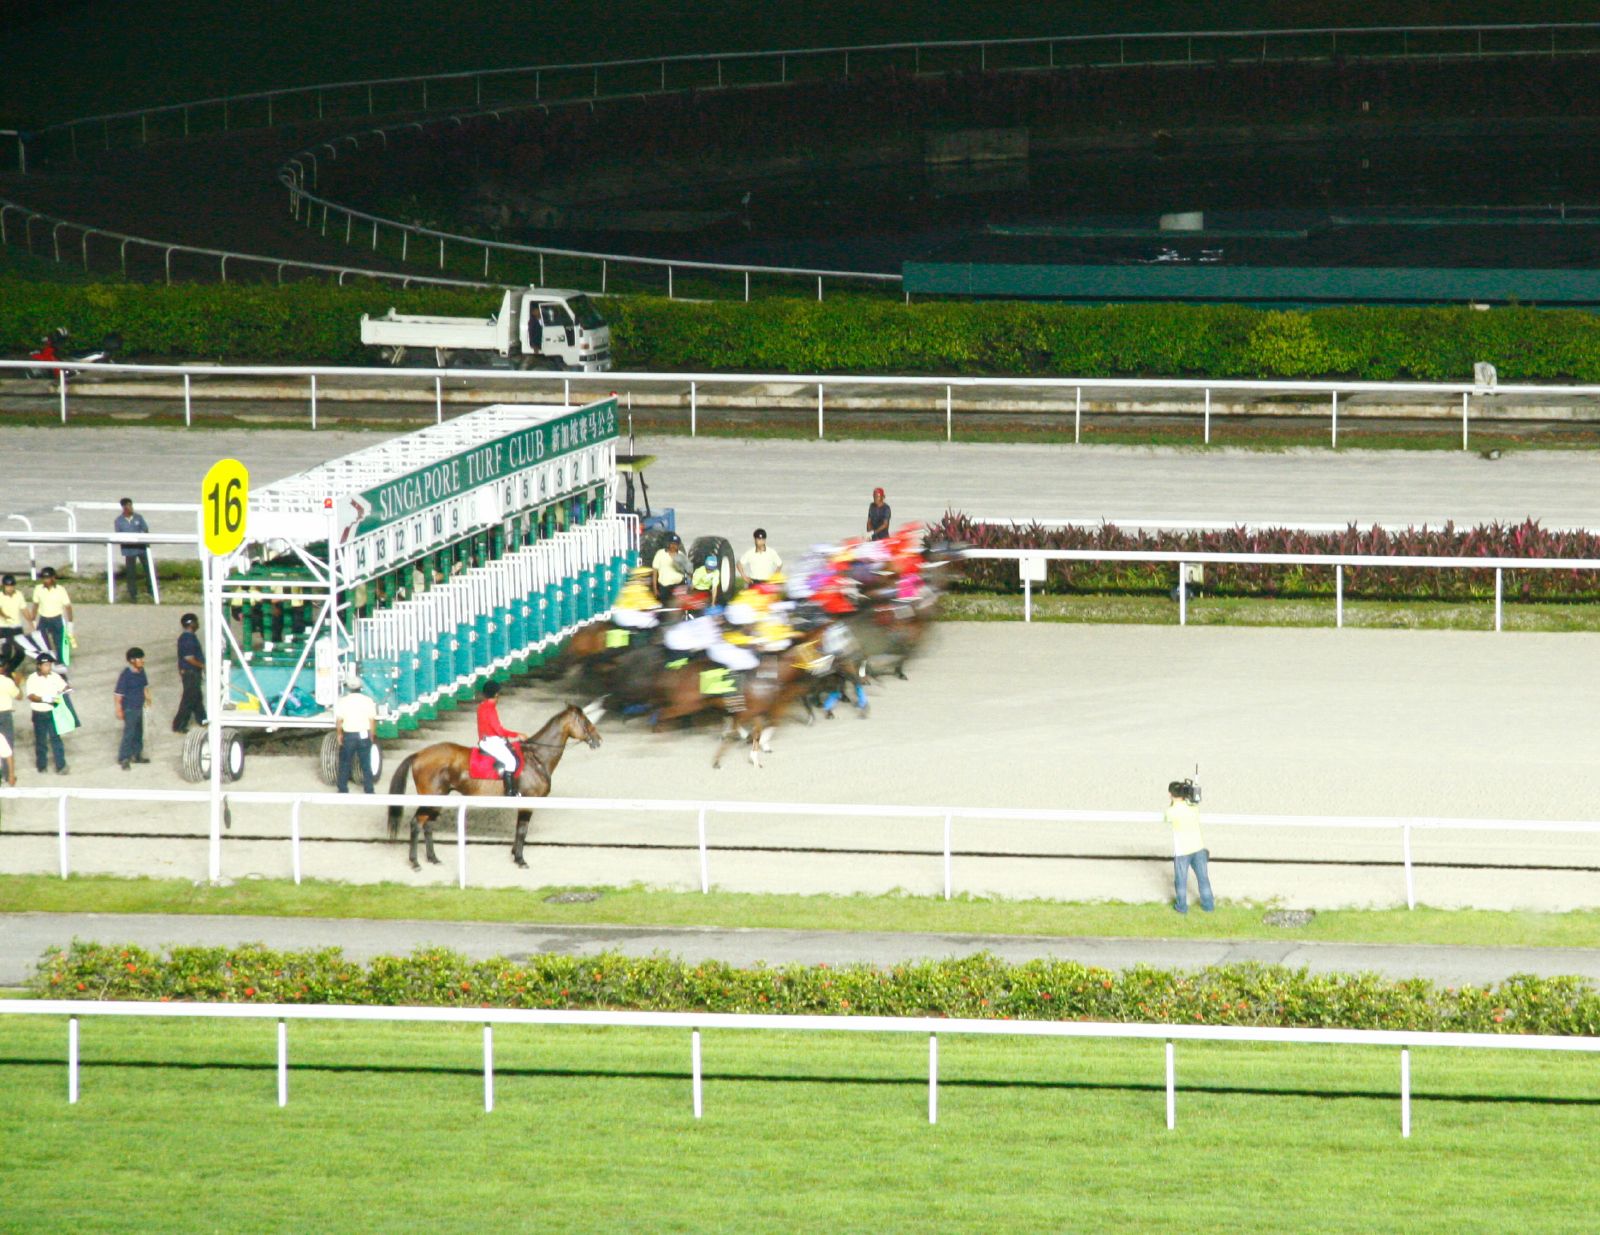 a horse racing game is being played on an open track